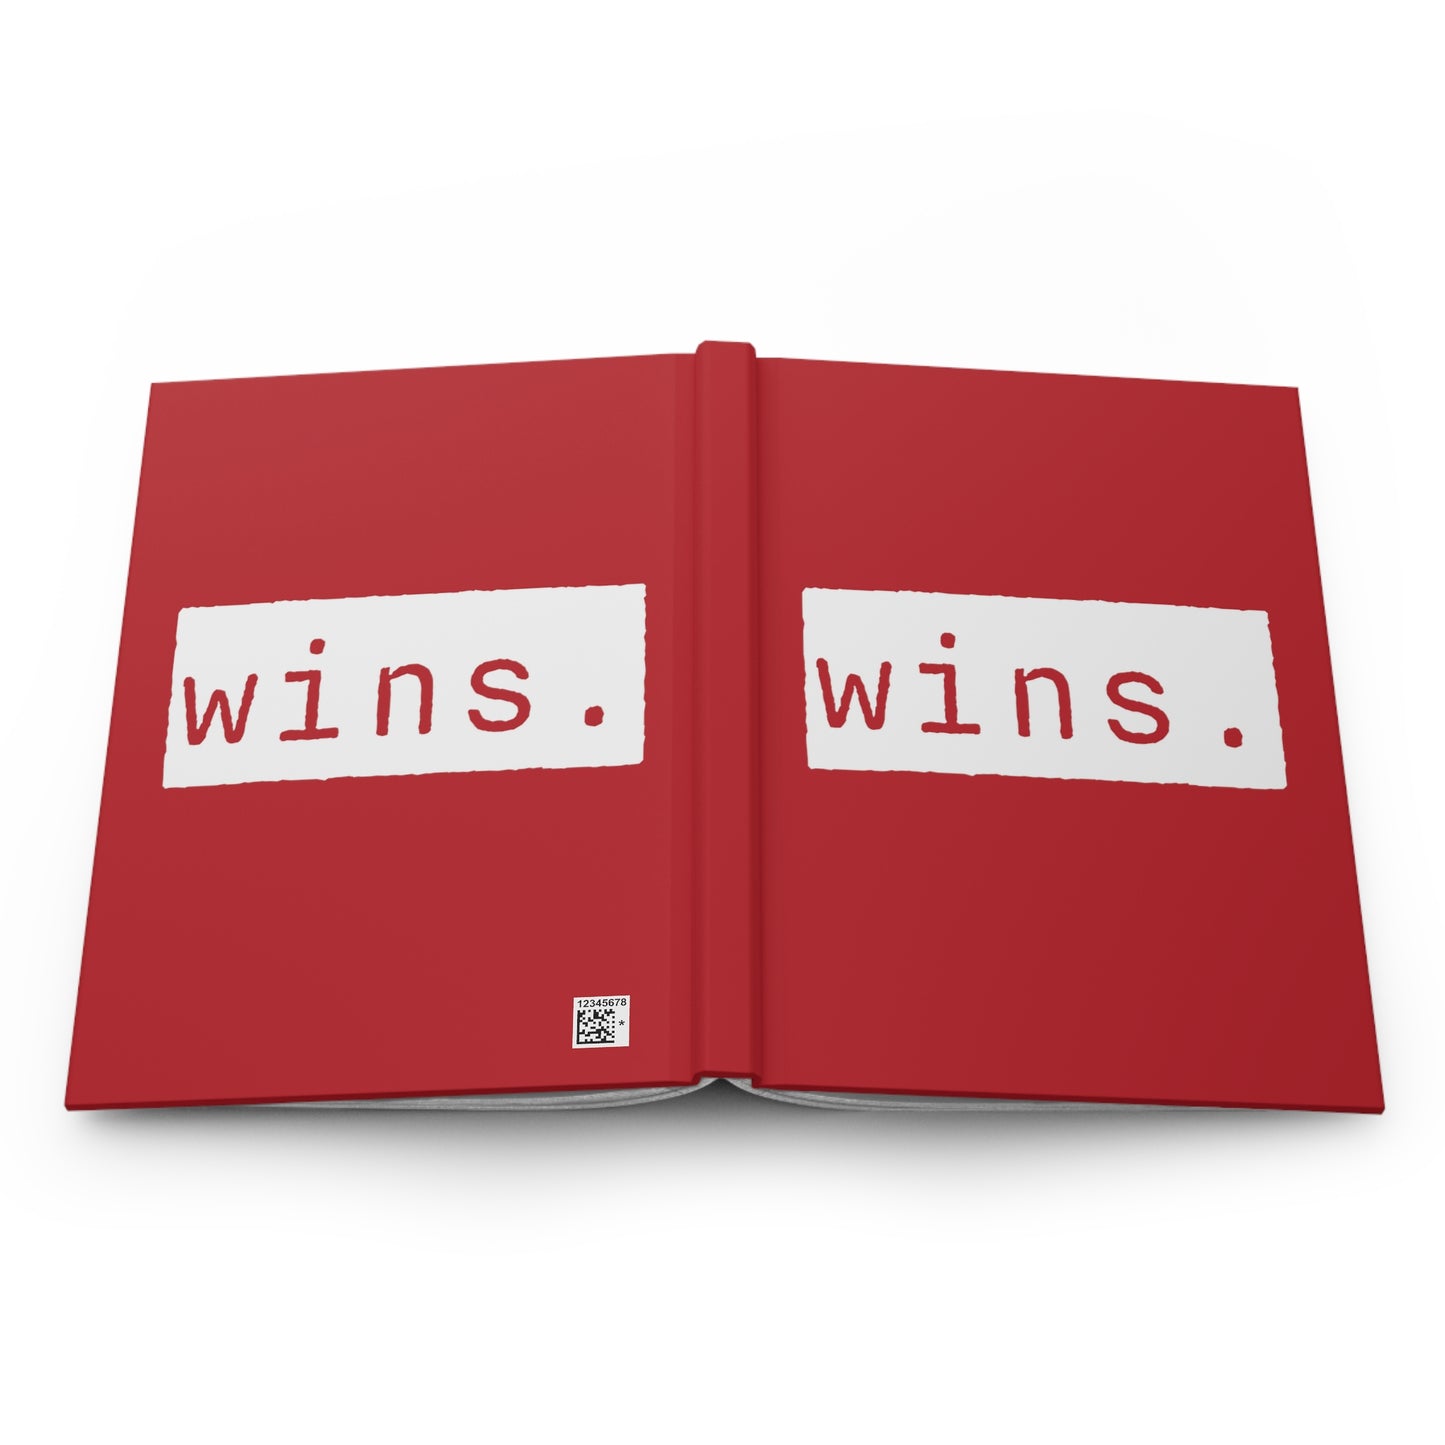 Wins Red Matte Hardcover Journal | Blank Book for Ideas | Lined Notebook Diary Log, Gratitude and Positive Thinking